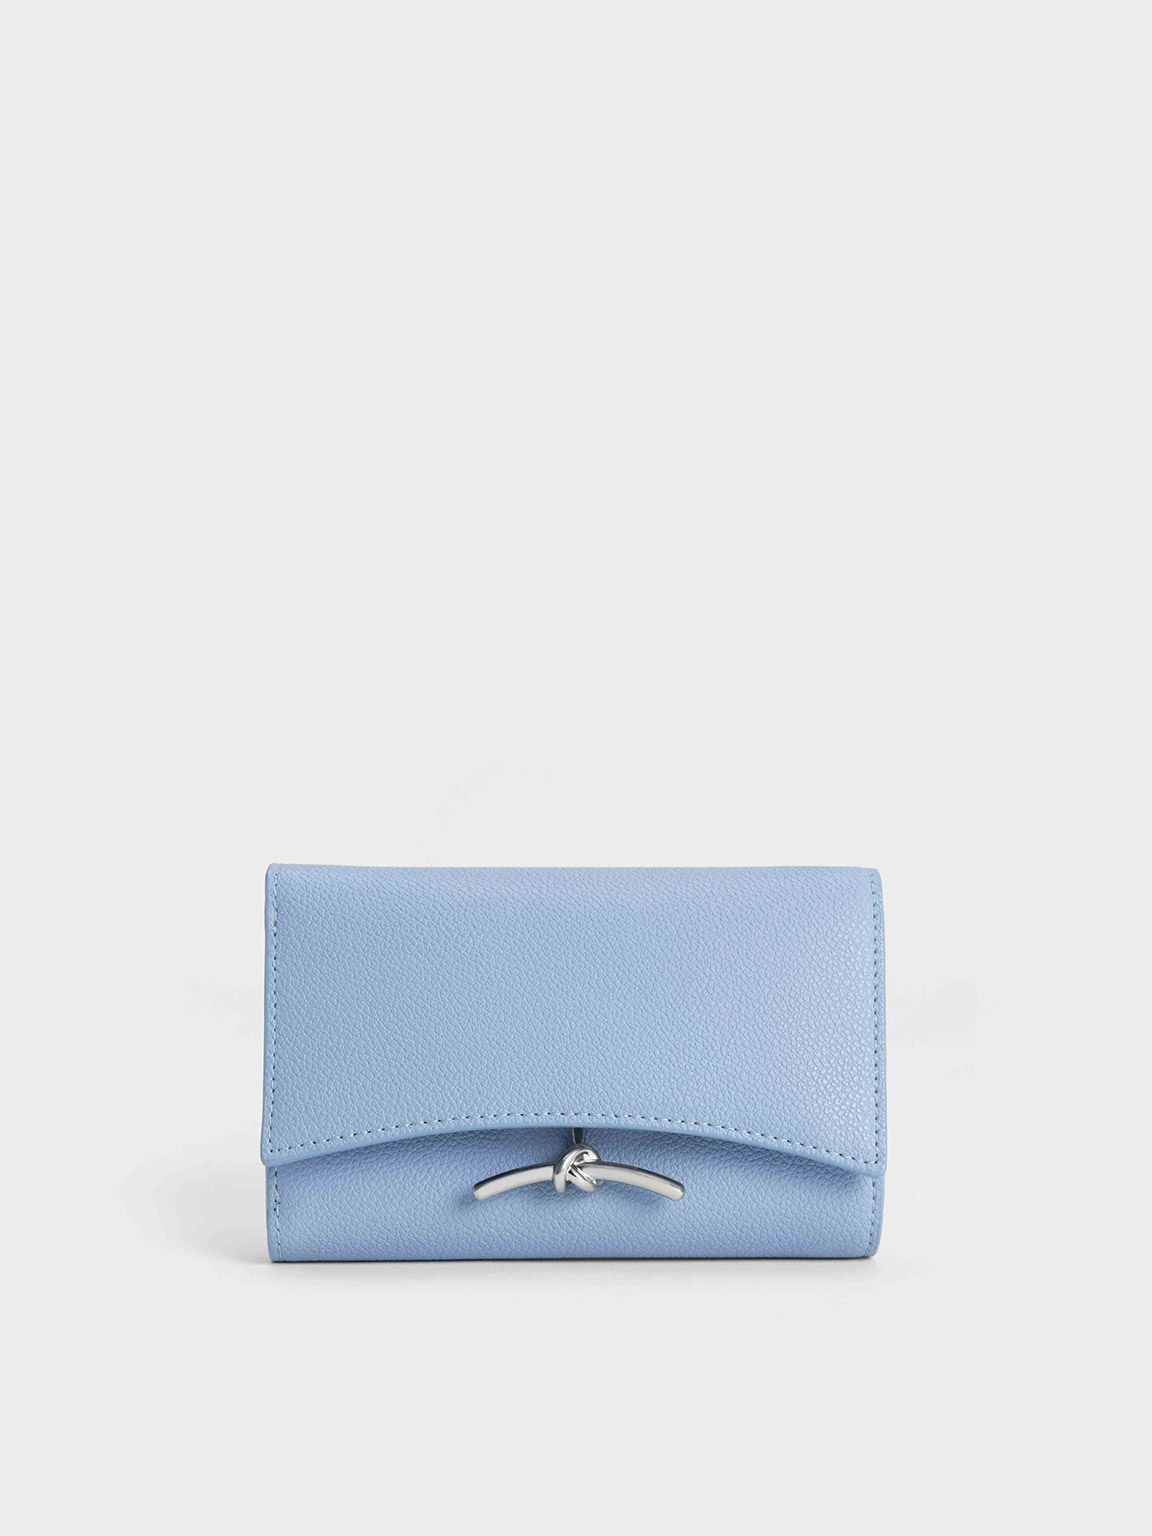 Blue Wallets: Add a Pop of Color to Your Accessories